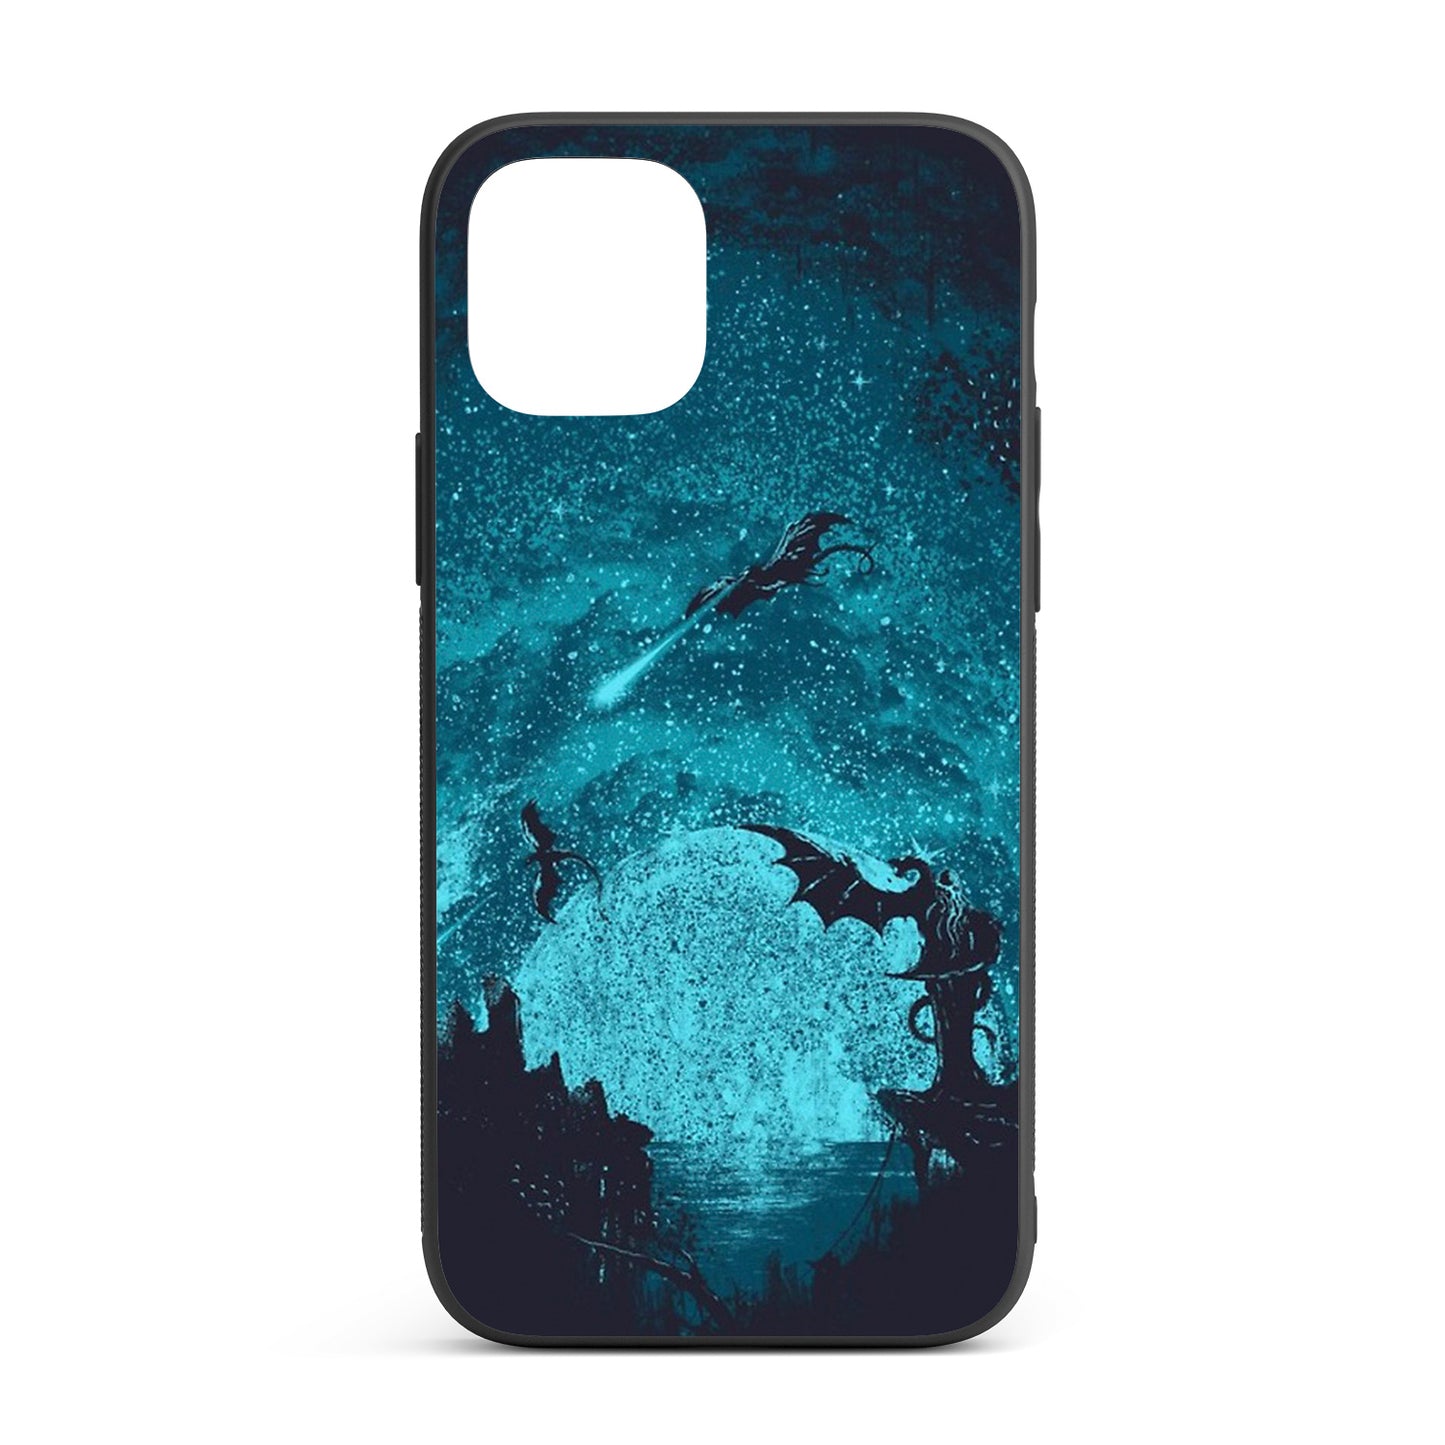 Dragons iPhone glass case